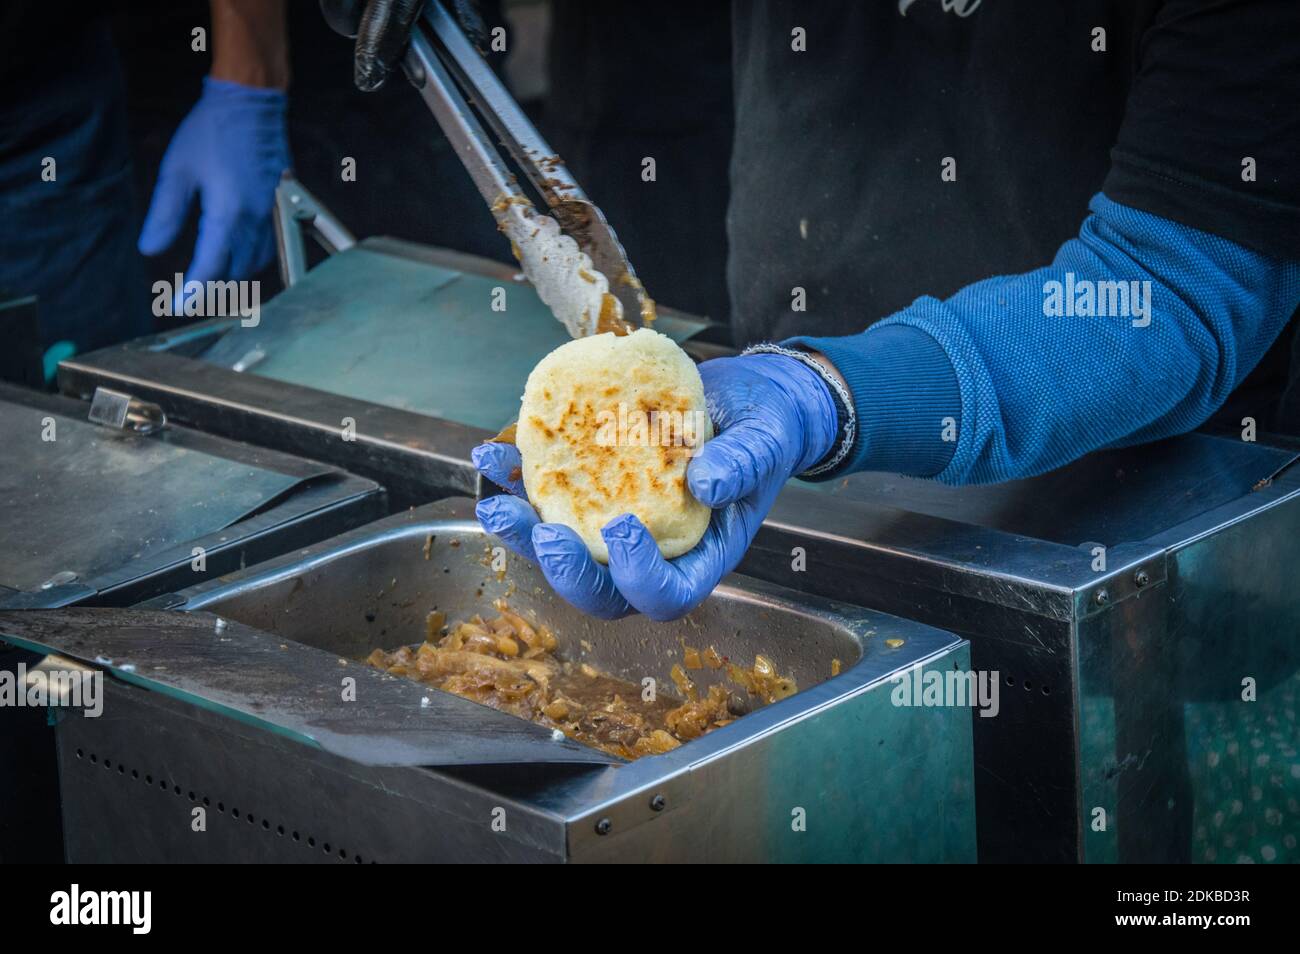 Midsection Of Man Preparing Arepa On Barbecue Grill Stock Photo